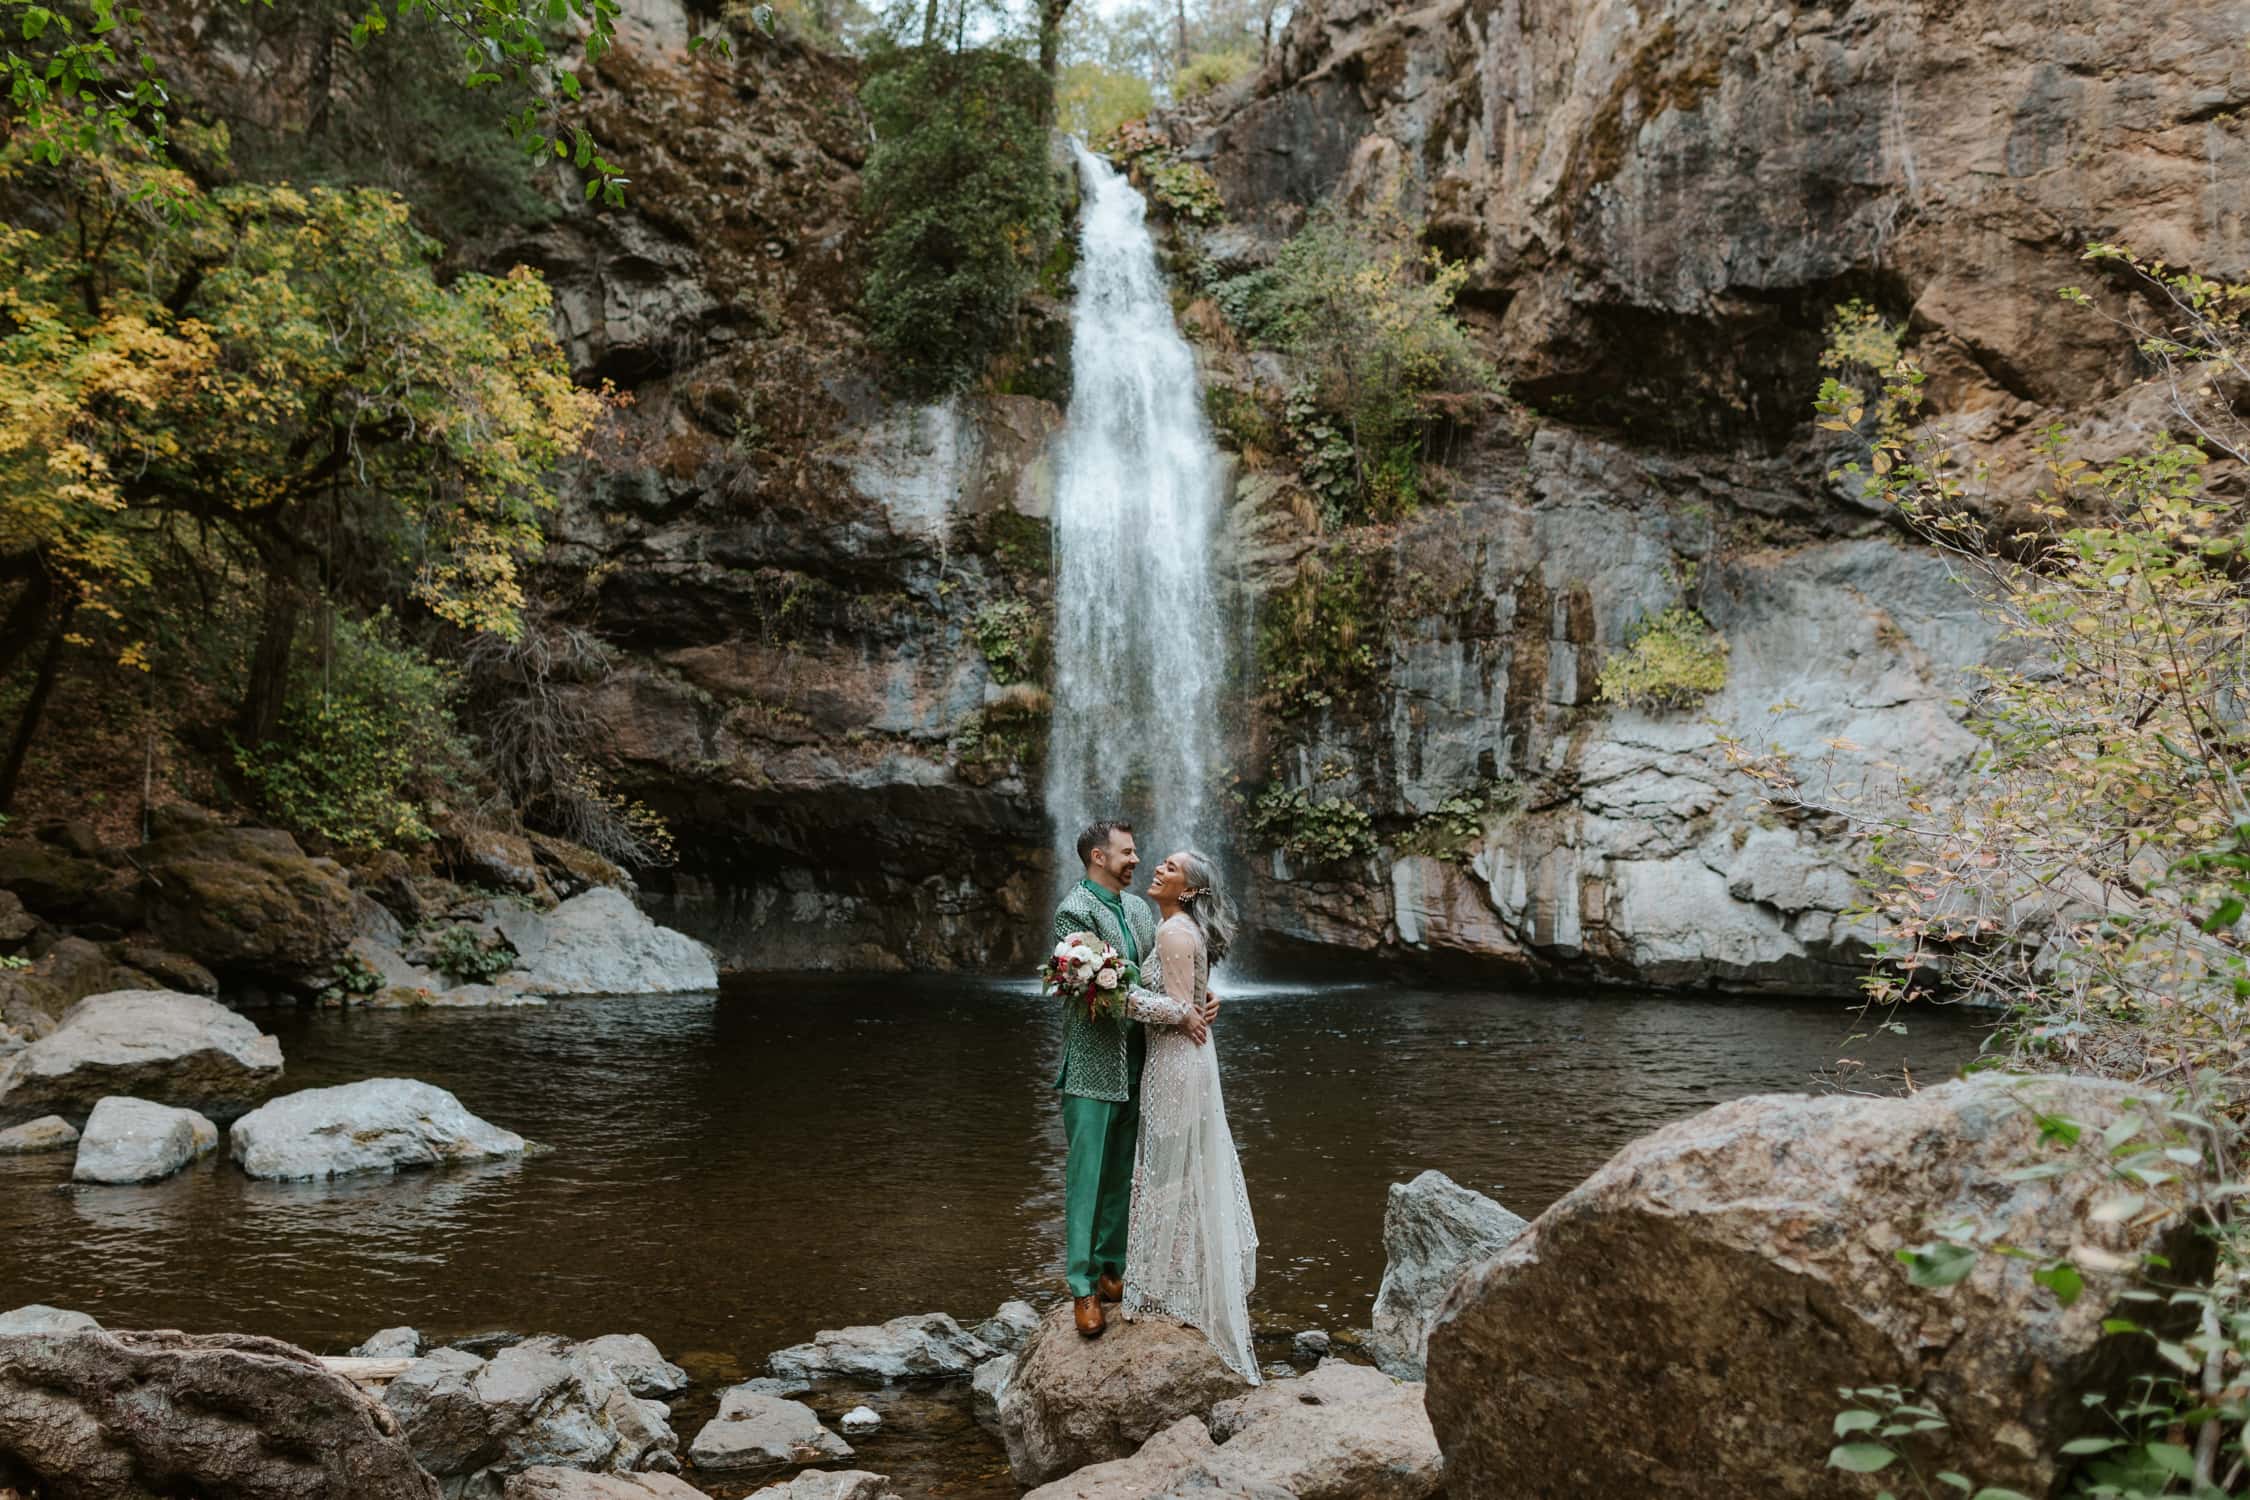 A couple in Indian wedding attire facing each other and laughing in front of a waterfall in Northern California.